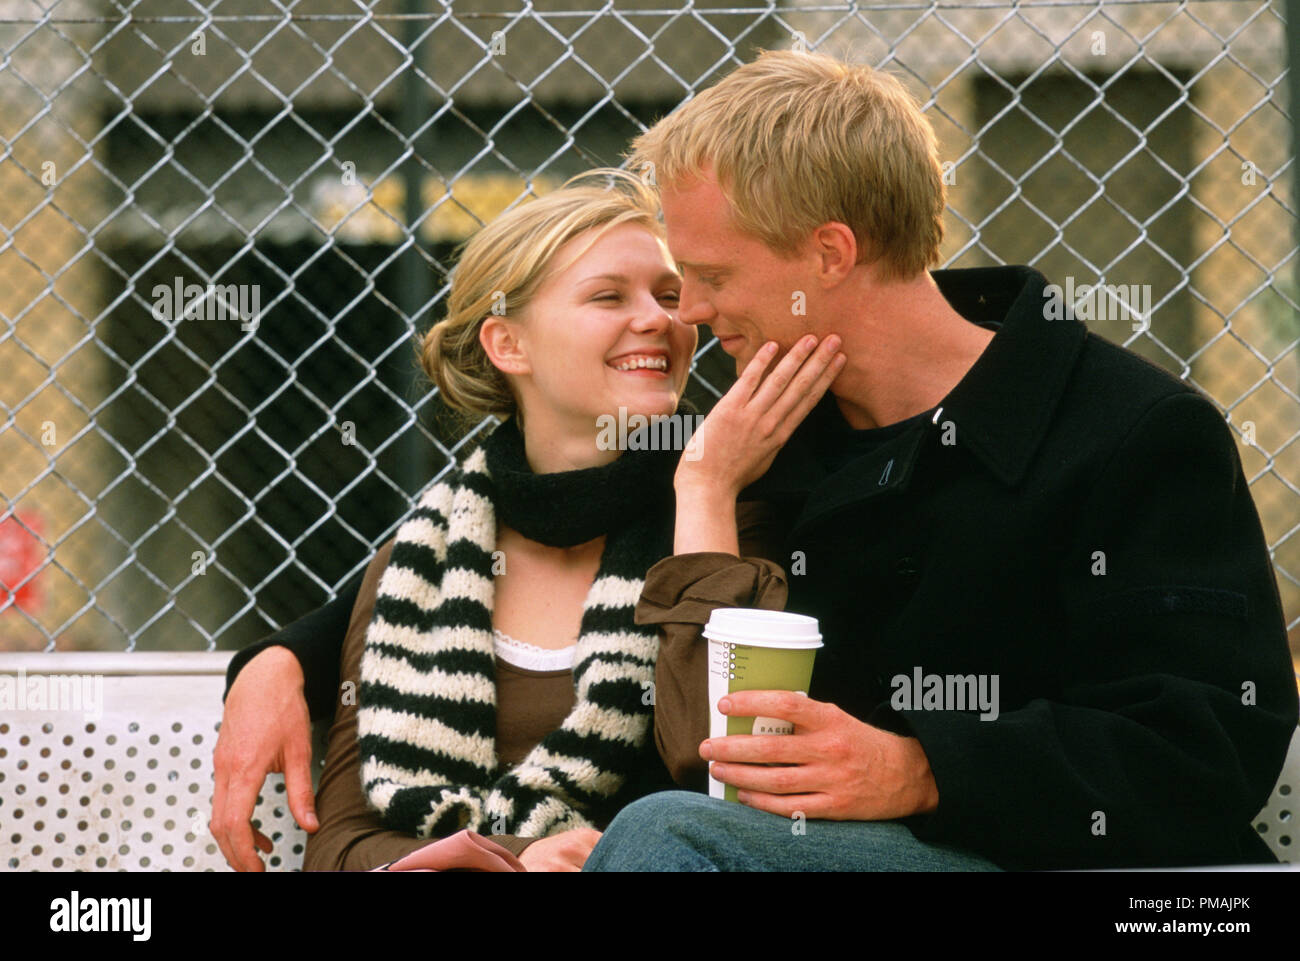 American tennis champ Lizzie Bradbury (KIRSTEN DUNST) and low-ranked British tennis player Peter Colt (PAUL BETTANY) engage in a cross-court affair in Working Title Films' romantic comedy Wimbledon. (2004) Stock Photo